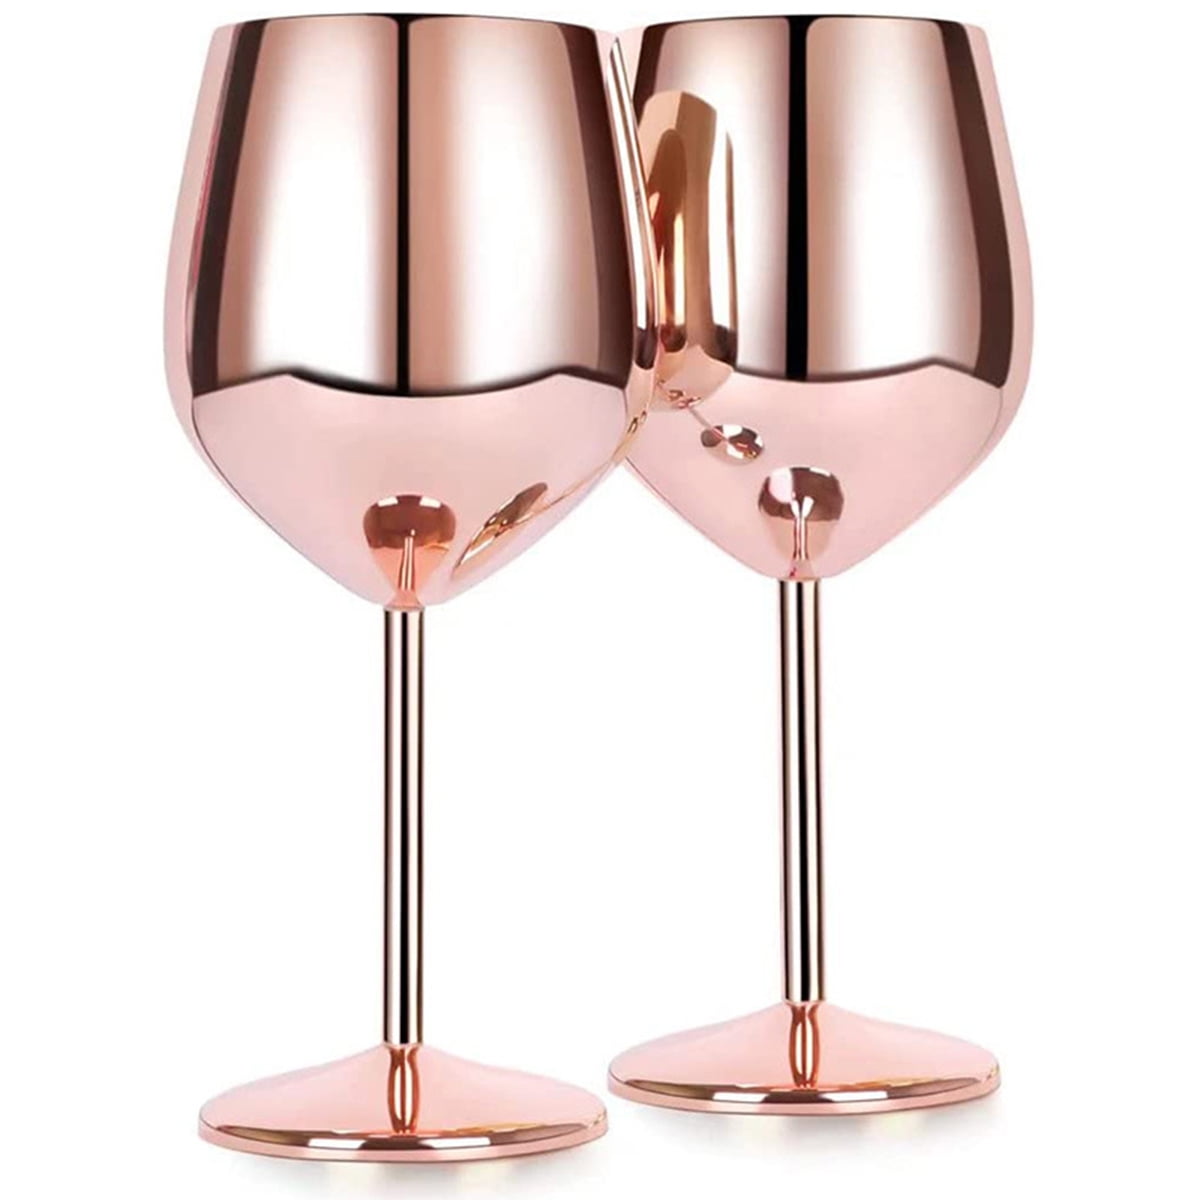 Pumtus 2 Pack Wine Glasses With Rose Inside, 10 OZ Creative Stemmed  Drinking Goblet, Unique Romantic…See more Pumtus 2 Pack Wine Glasses With  Rose